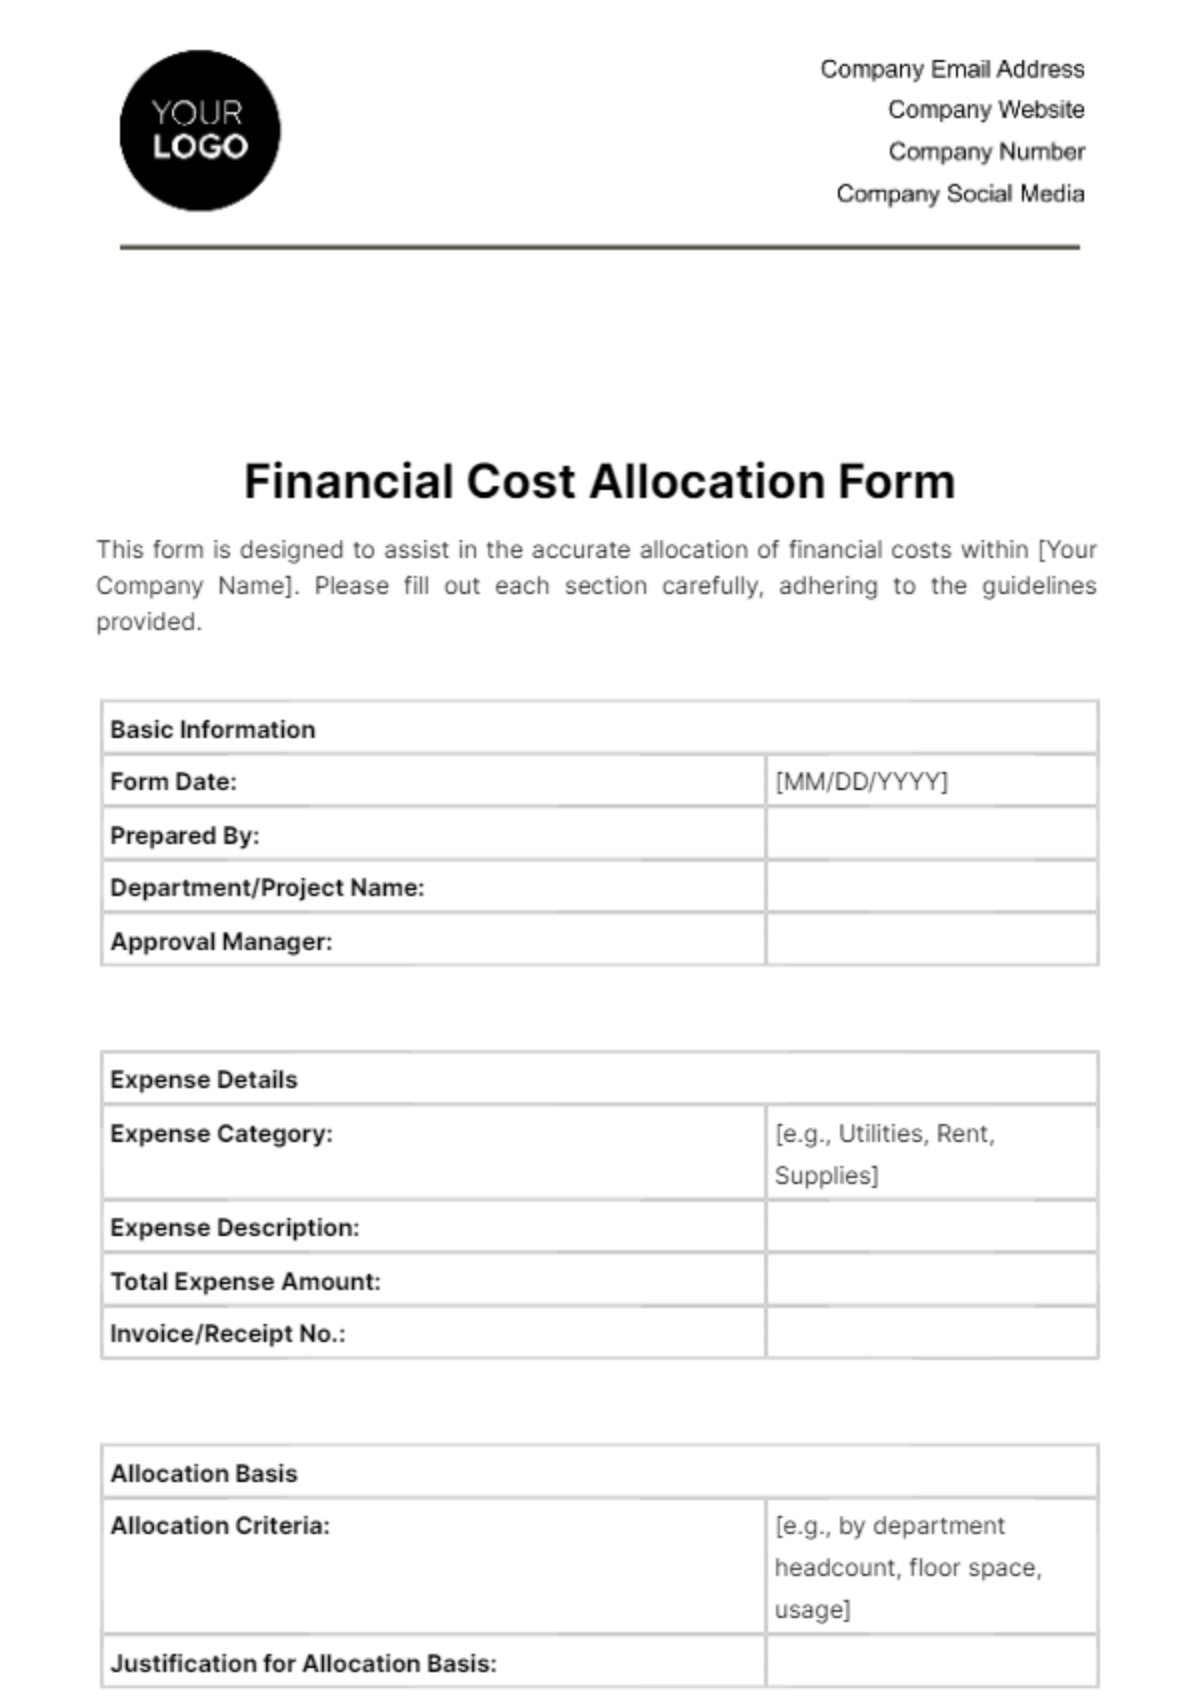 Free Financial Cost Allocation Form Template